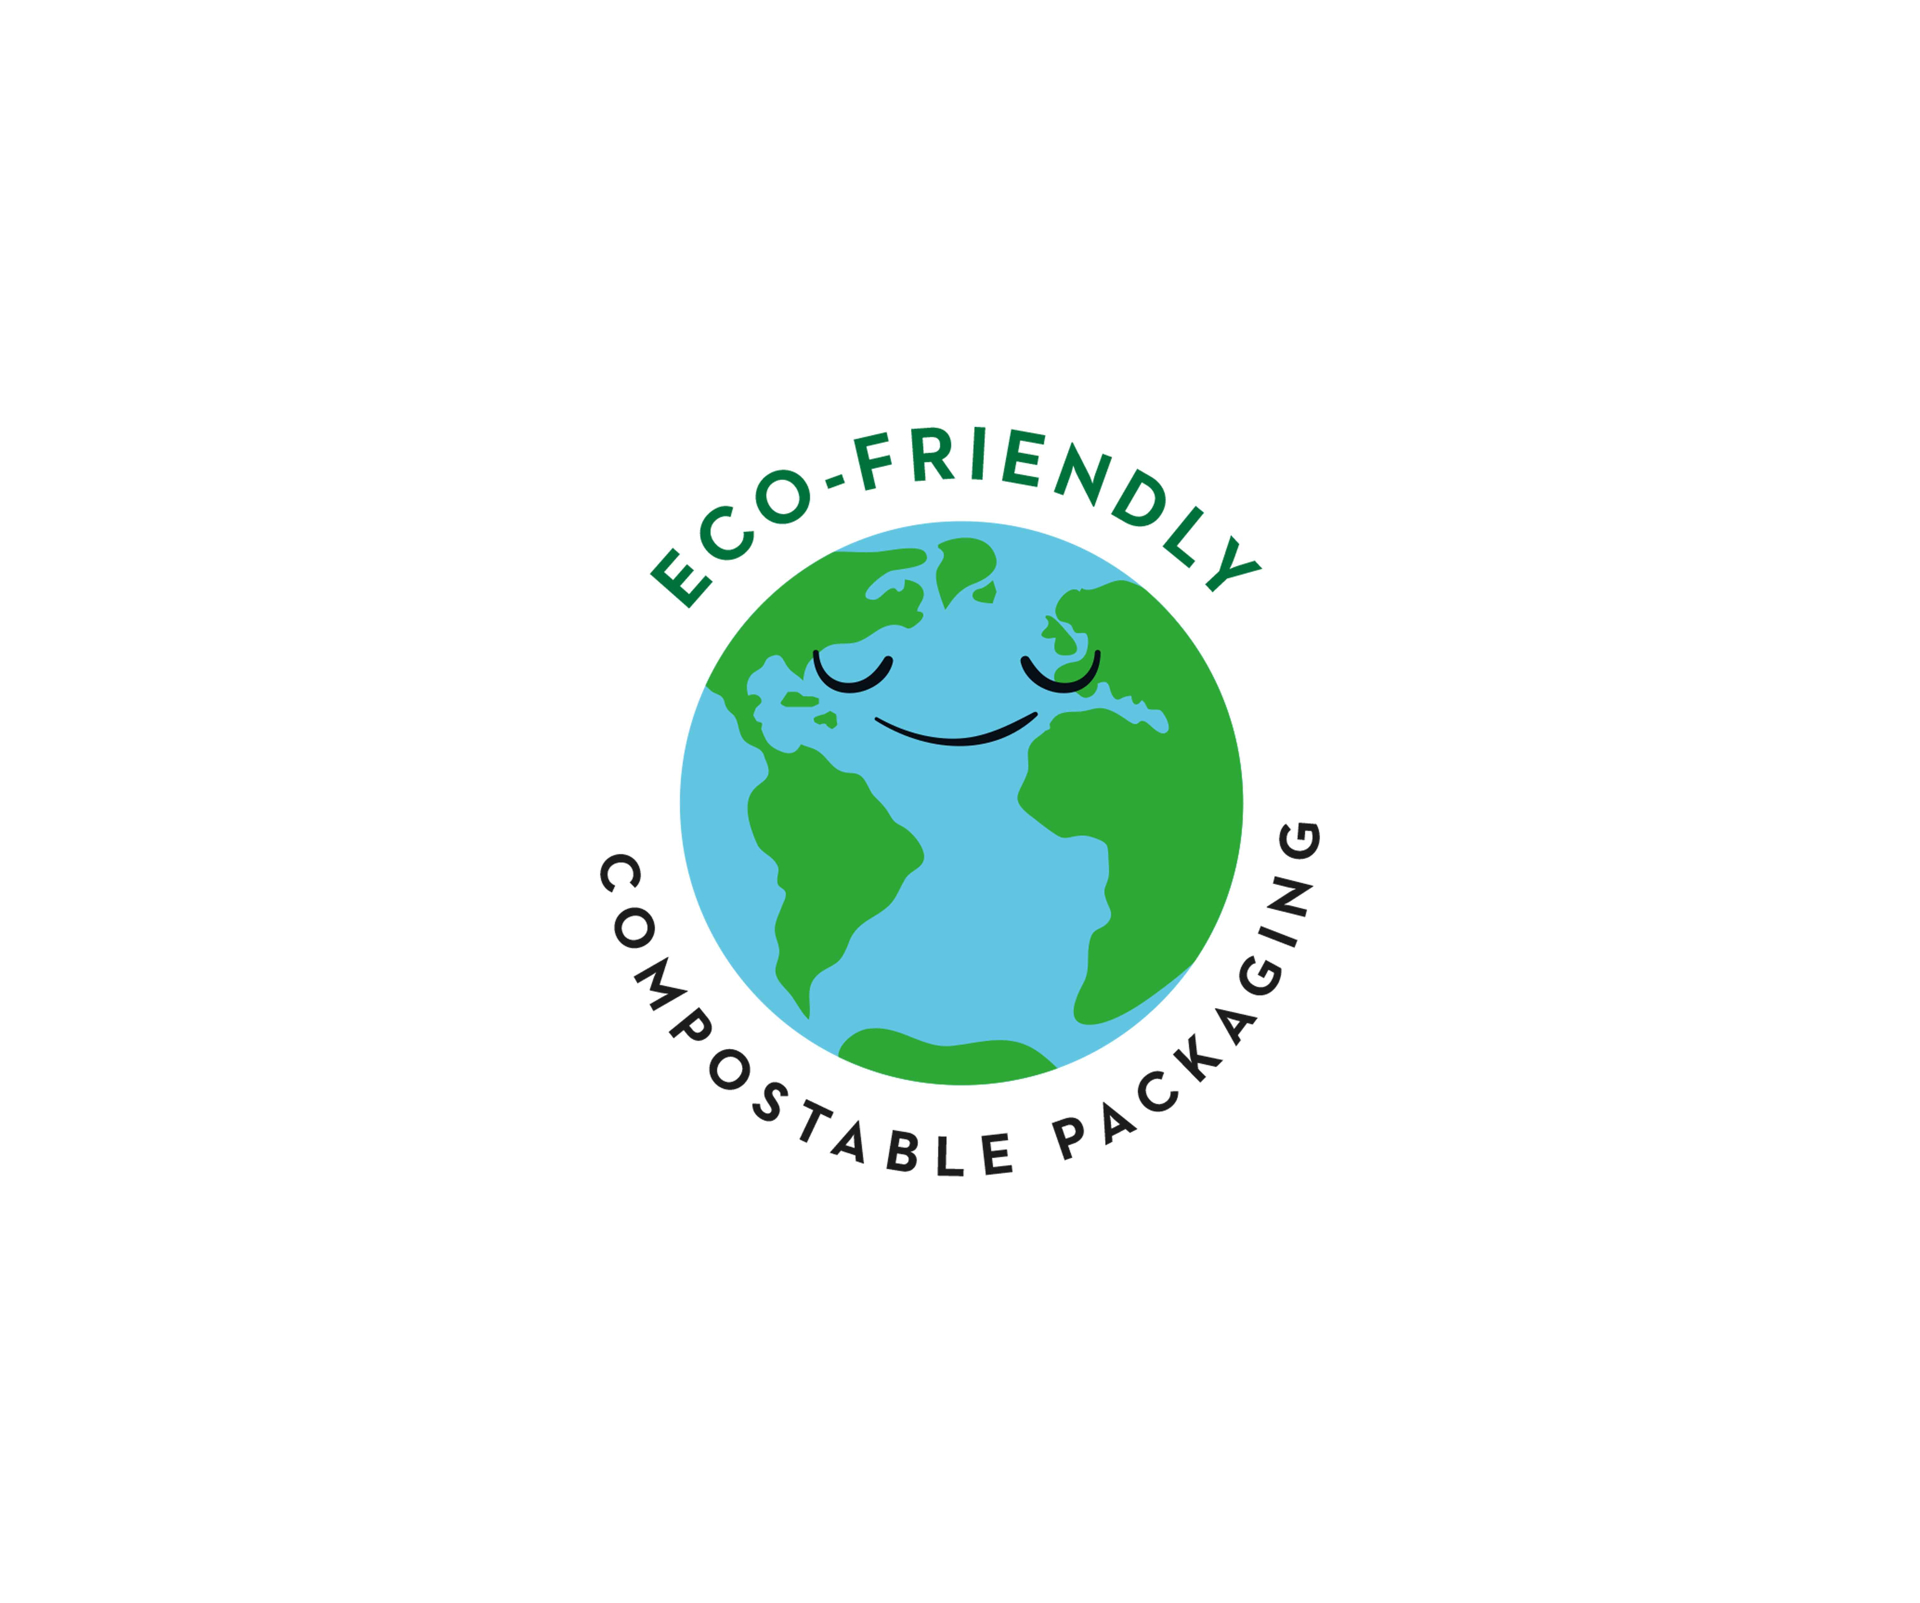 Ecp-friendly and compostable packaging logo